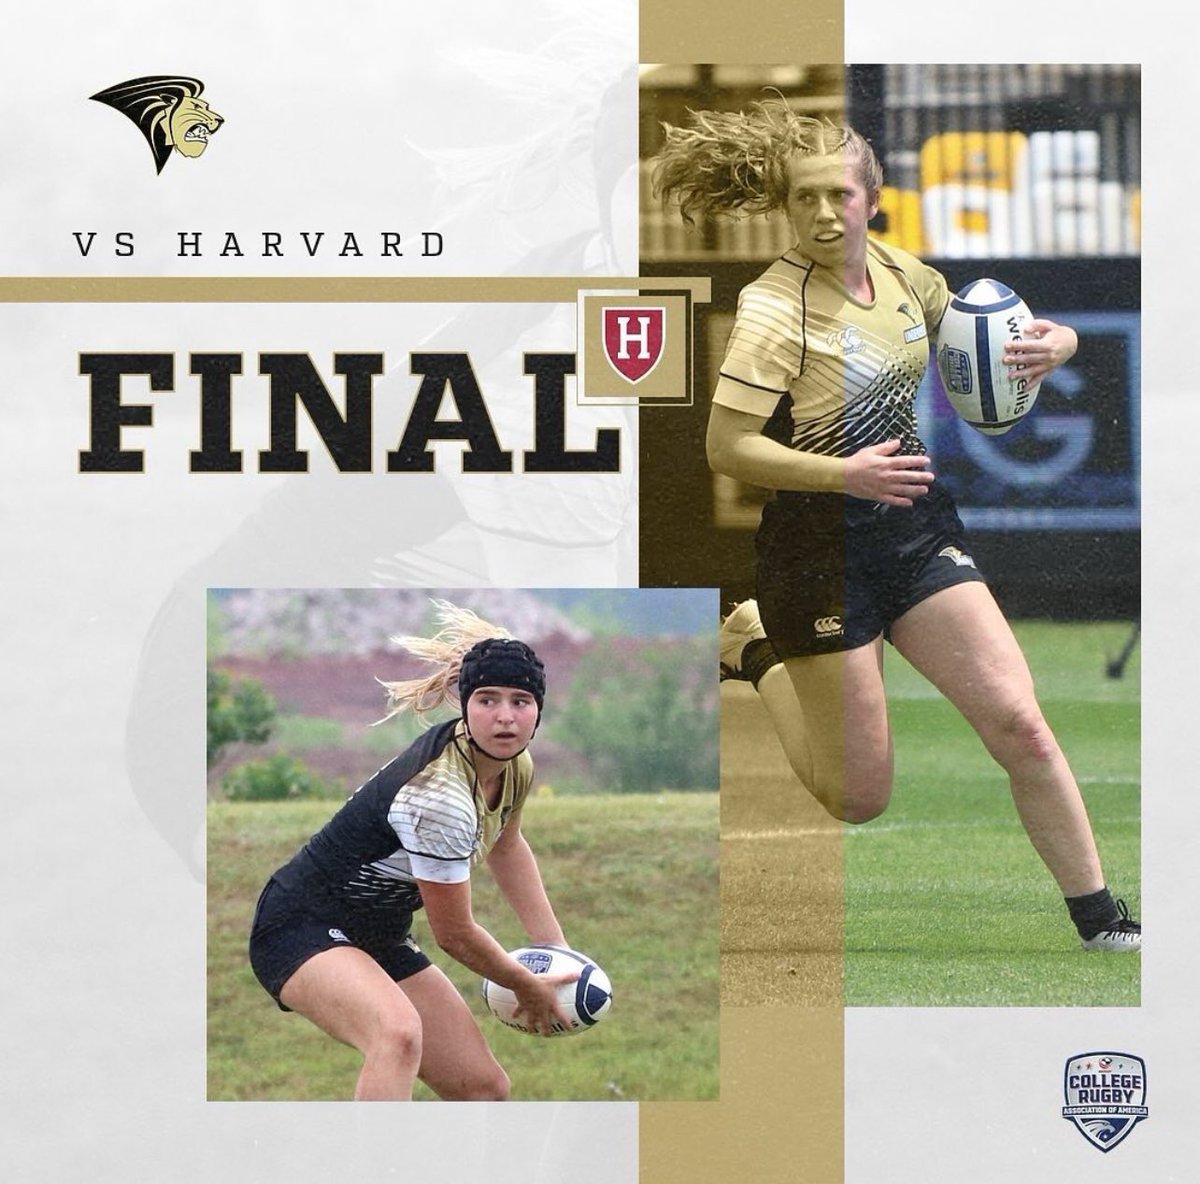 A big match ahead later today for @LUWomensRugby as they compete for the CRAA Women’s Premier National Championship‼️🦁🏆 🆚 Harvard ⏰ 5:26 PM CT 📺 therugbynetwork.com